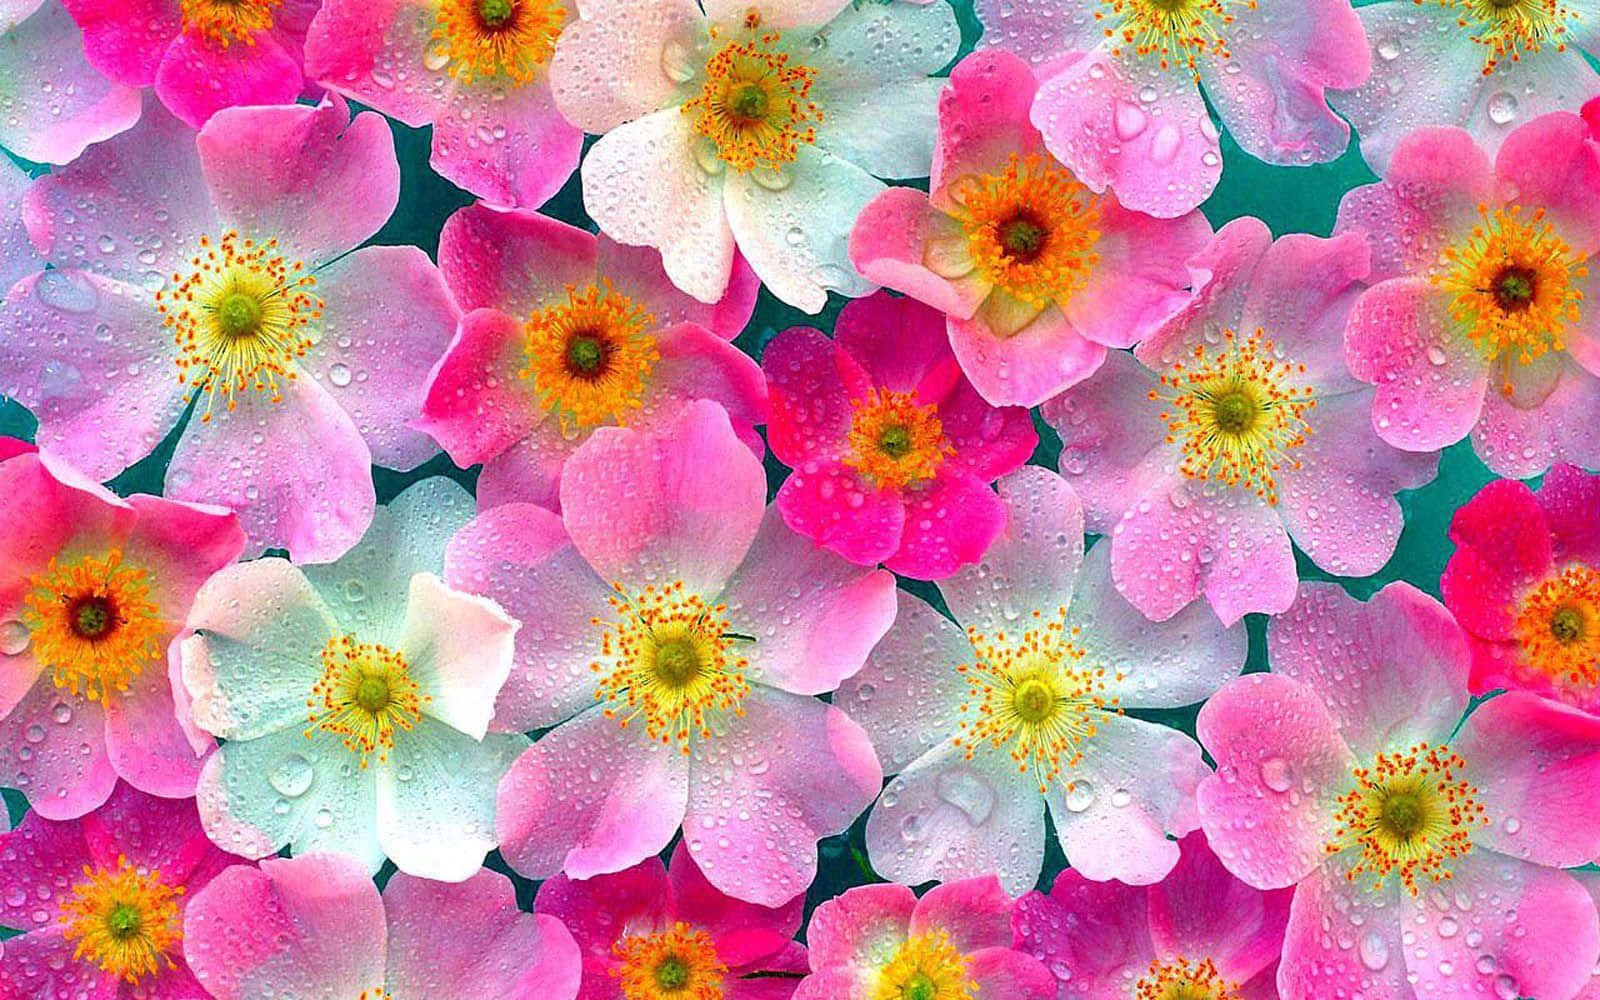 Brighten Up Your Day With This Beautiful Floral Laptop Pattern Background